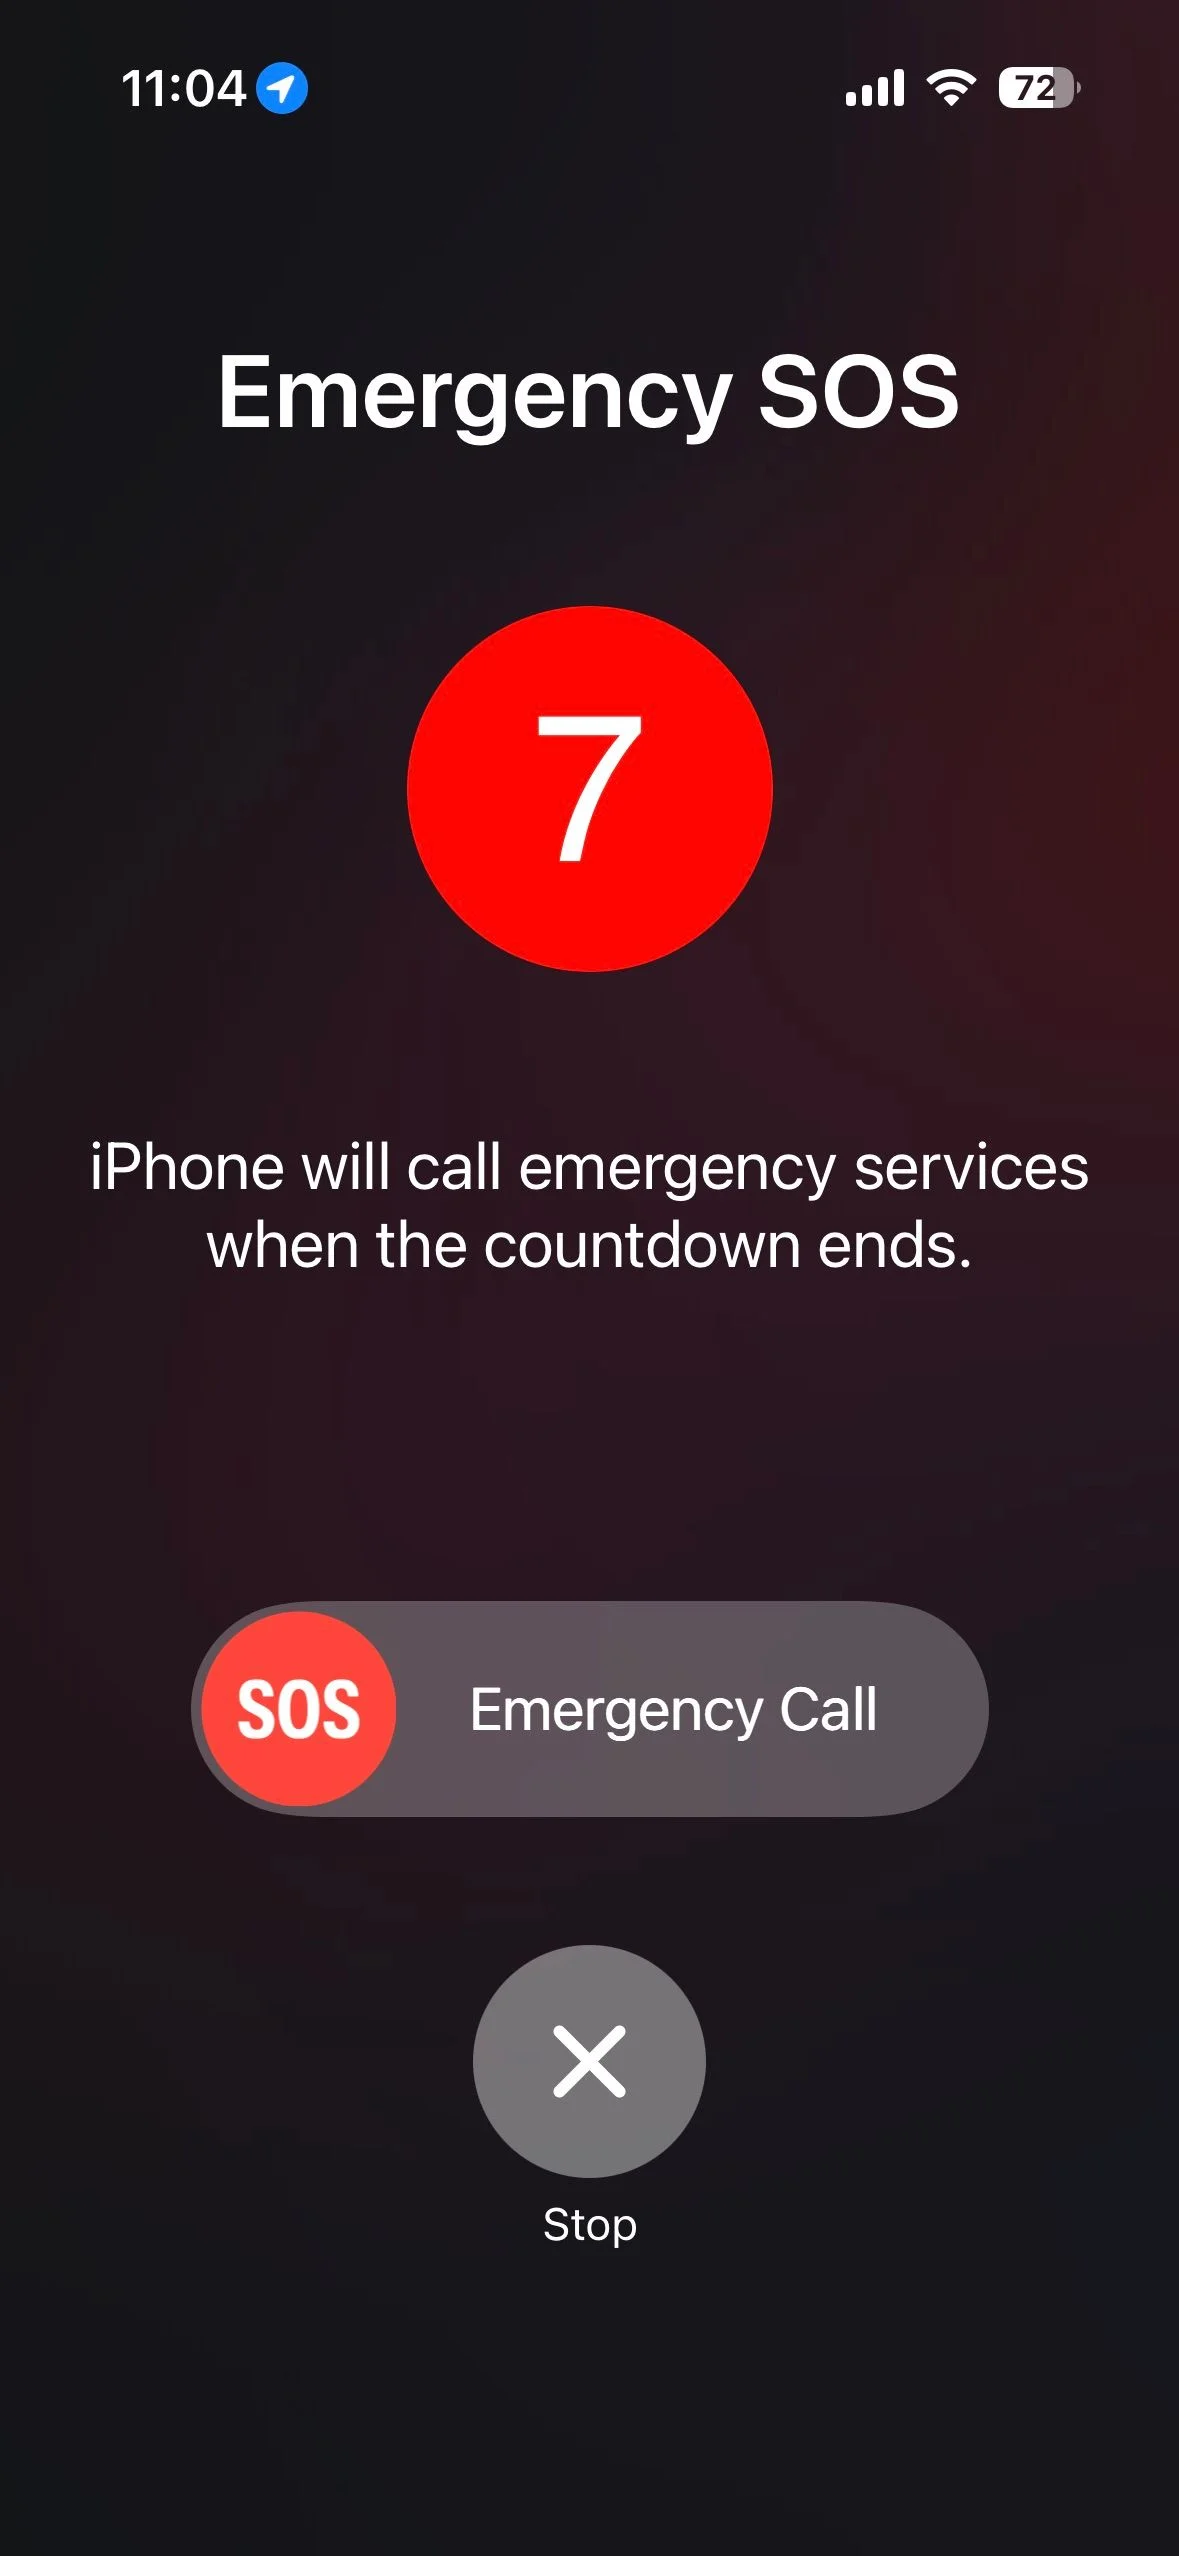 How to Safely Manage Your iPhone's SOS Feature to Avoid Accidental 911 Calls